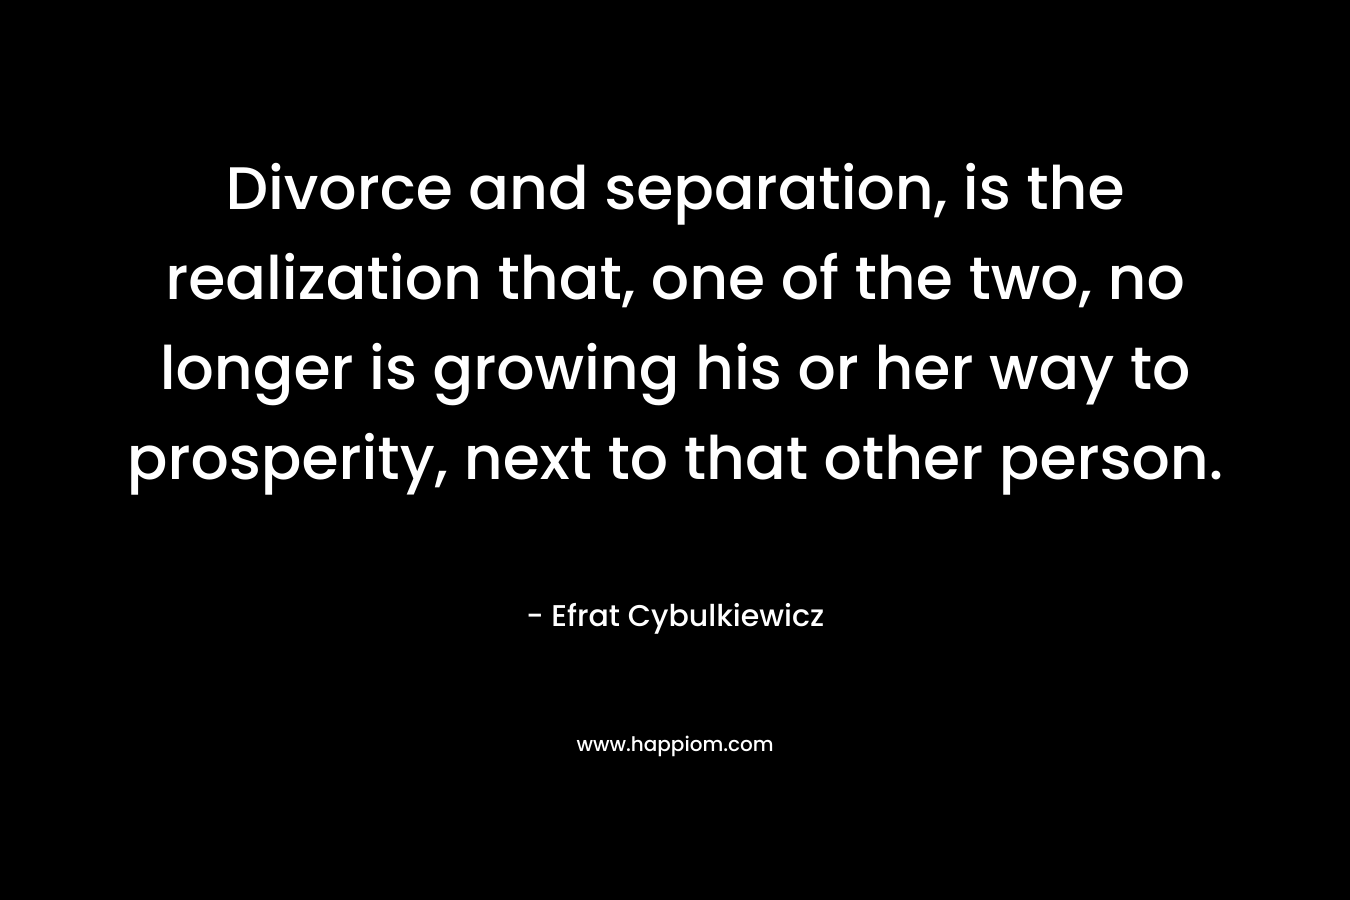 Divorce and separation, is the realization that, one of the two, no longer is growing his or her way to prosperity, next to that other person.